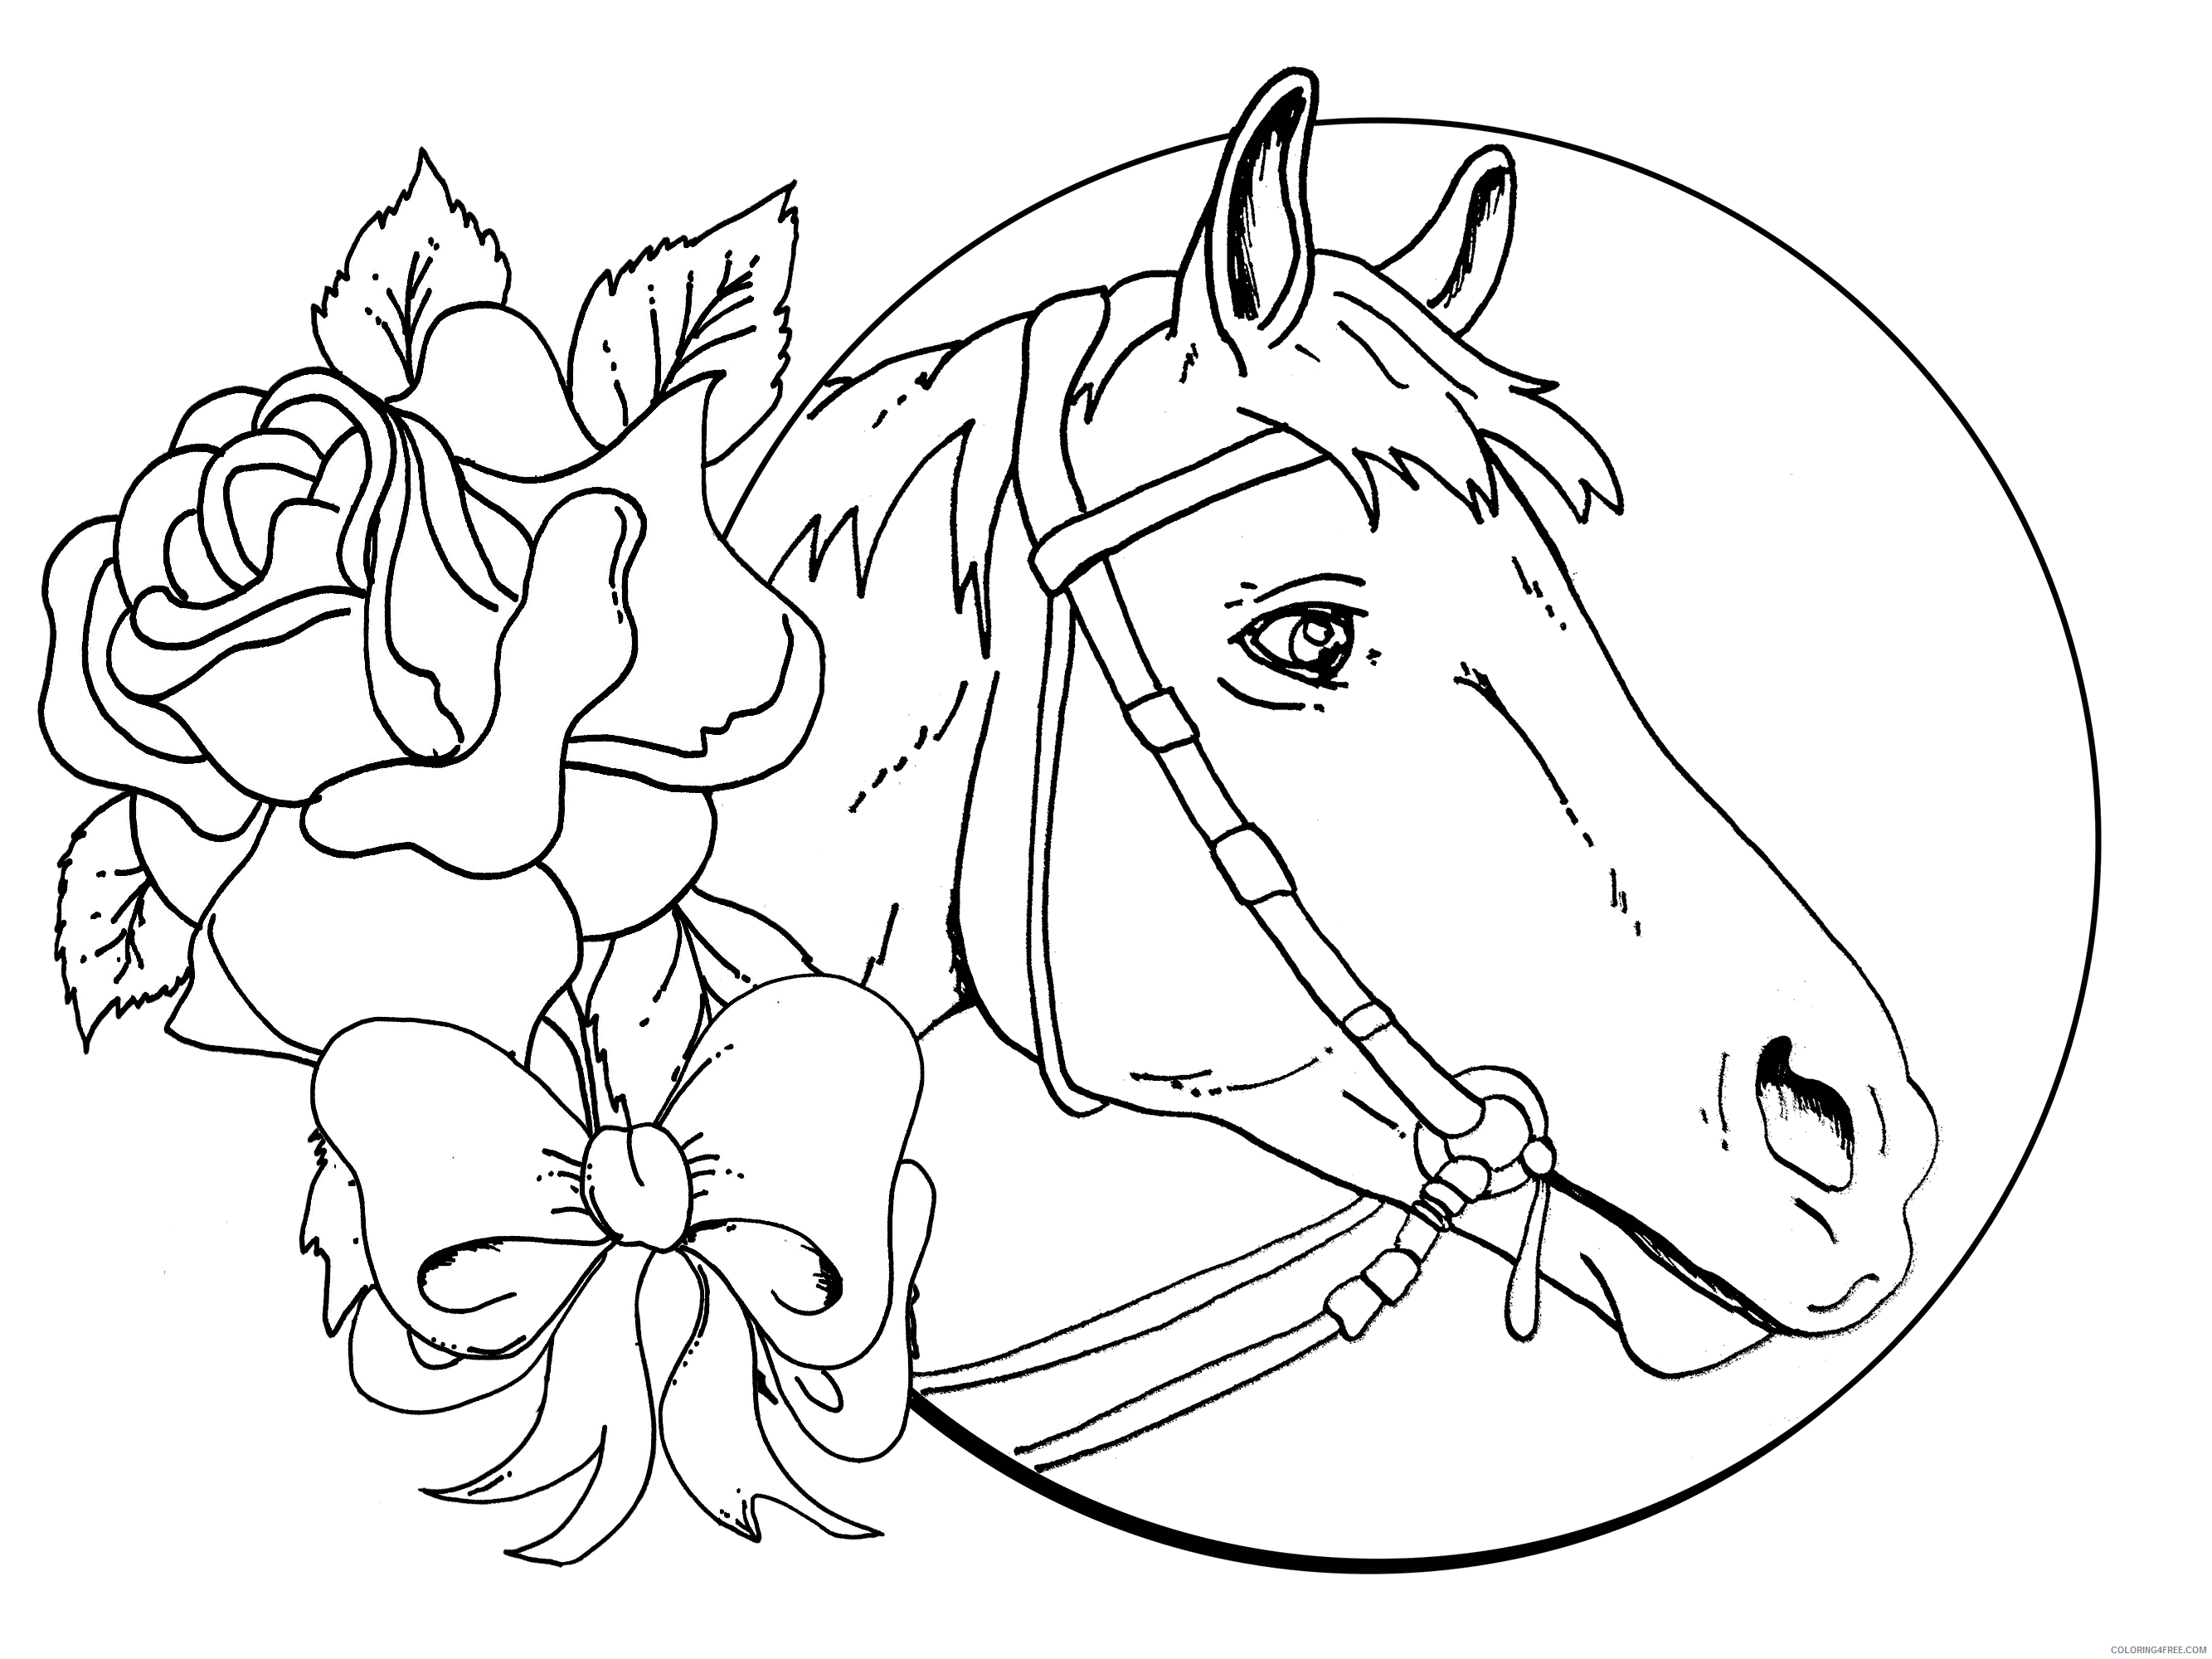 Horses Coloring Pages Animal Printable Sheets Free Horse Online Craft Cute 2021 Coloring4free Coloring4free Com